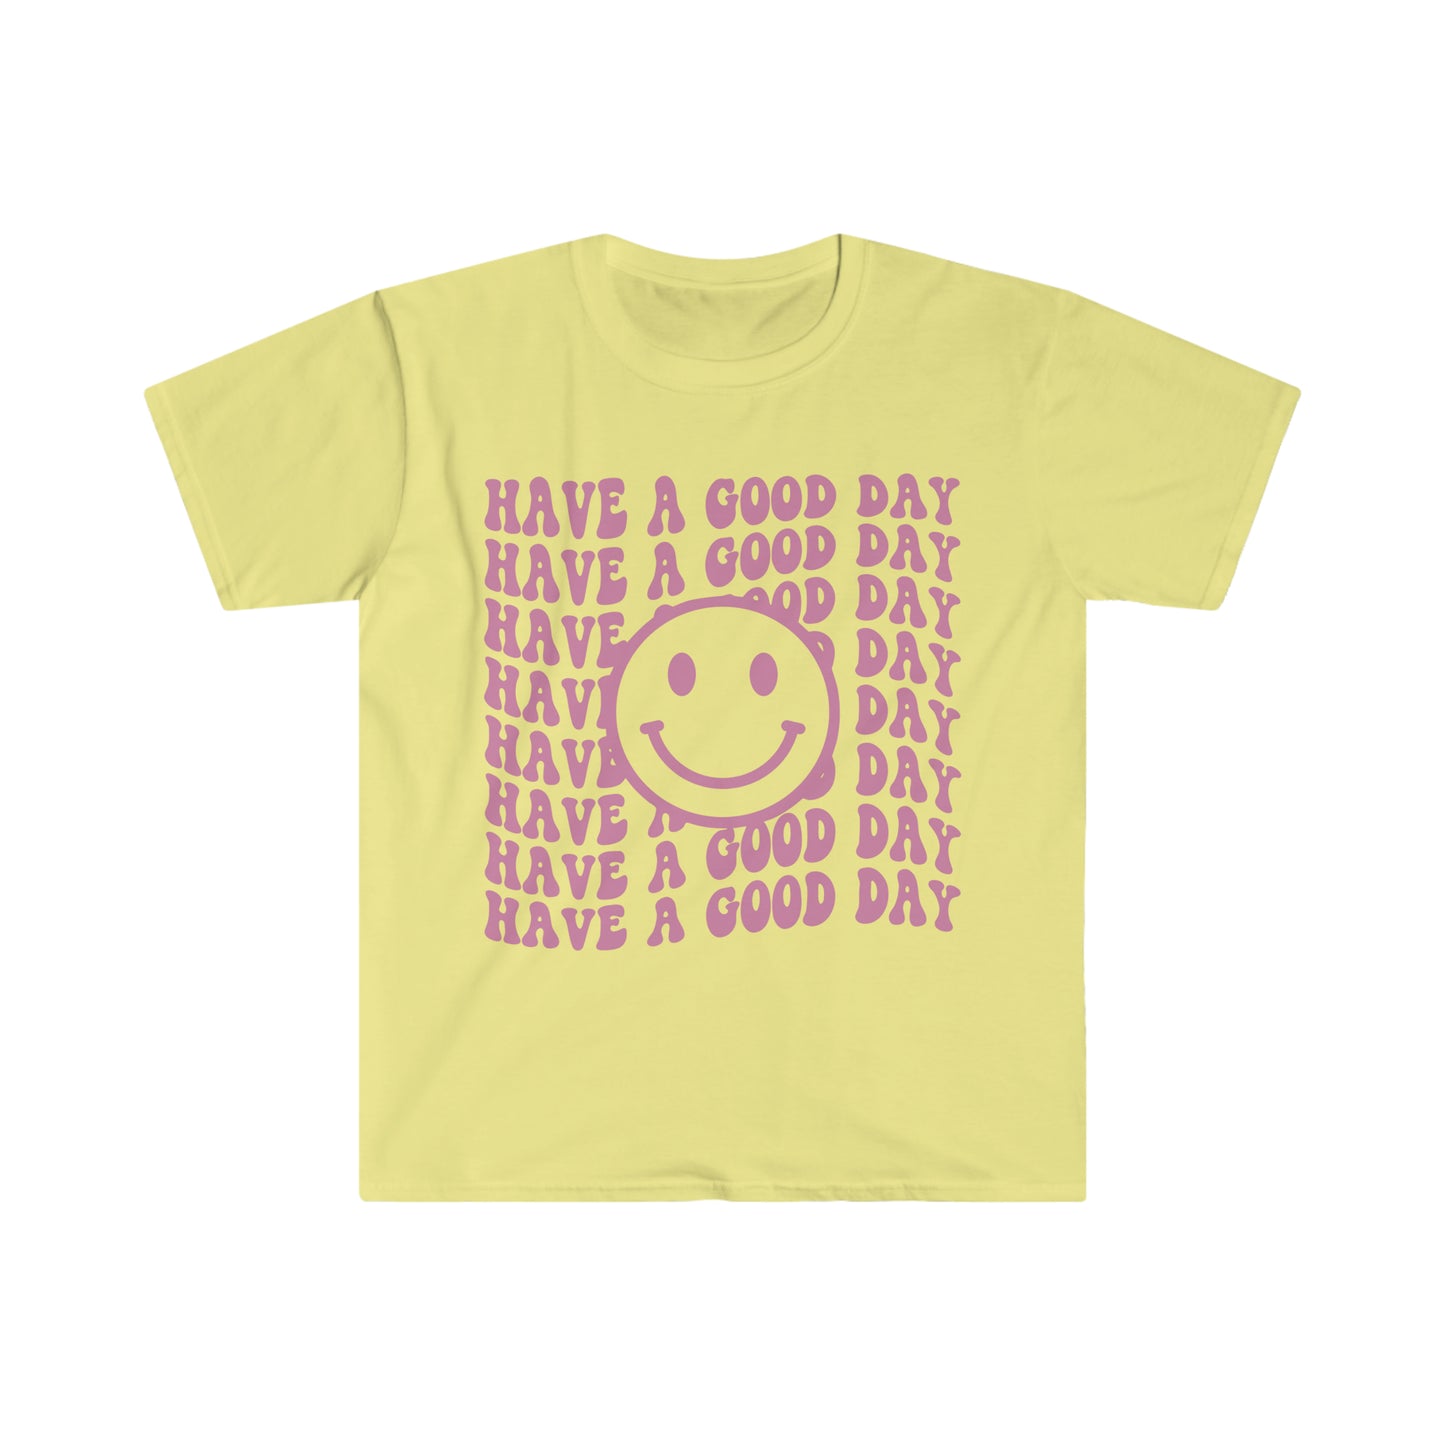 Have a Good Day - Unisex Softstyle T-Shirt